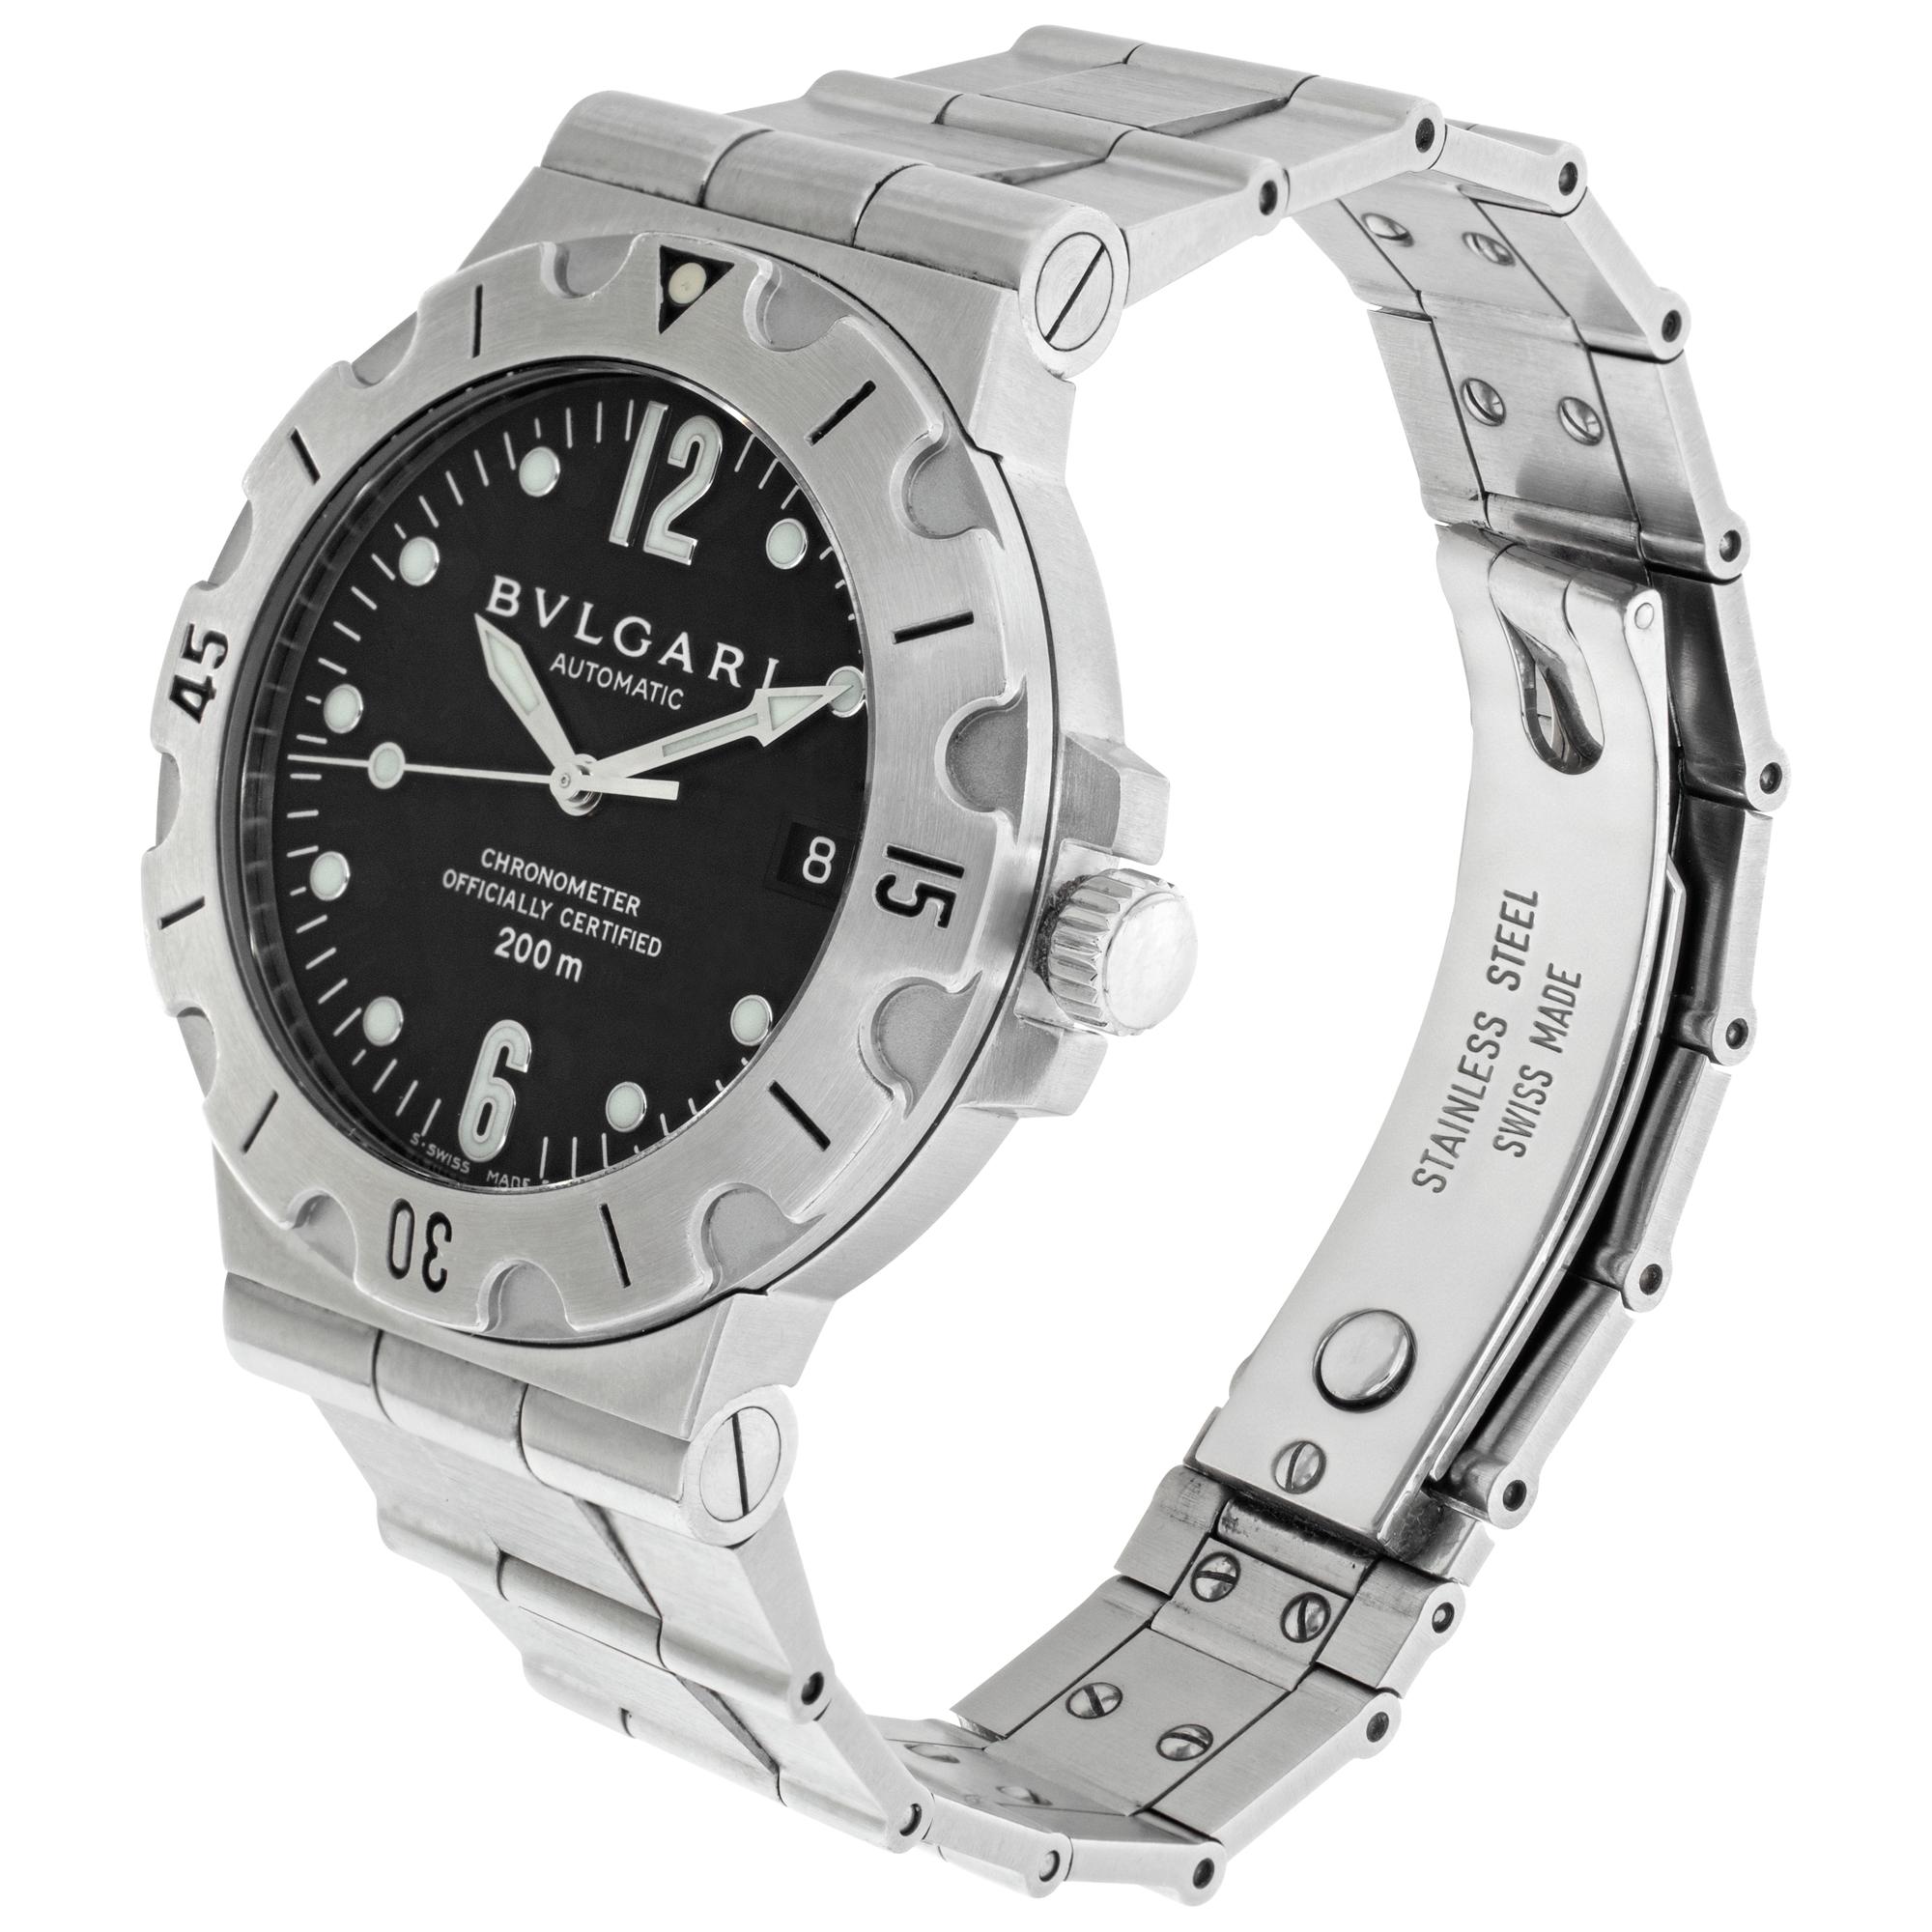 Bvlgari Diagono Scuba in stainless steel.  Auto w/ date and sweep seconds.38 mm case size. Ref sd38s. Fine Pre-owned Bvlgari / Bulgari Watch. Certified preowned Sport Bvlgari Diagono sd38s watch is made out of Stainless steel on a Stainless Steel